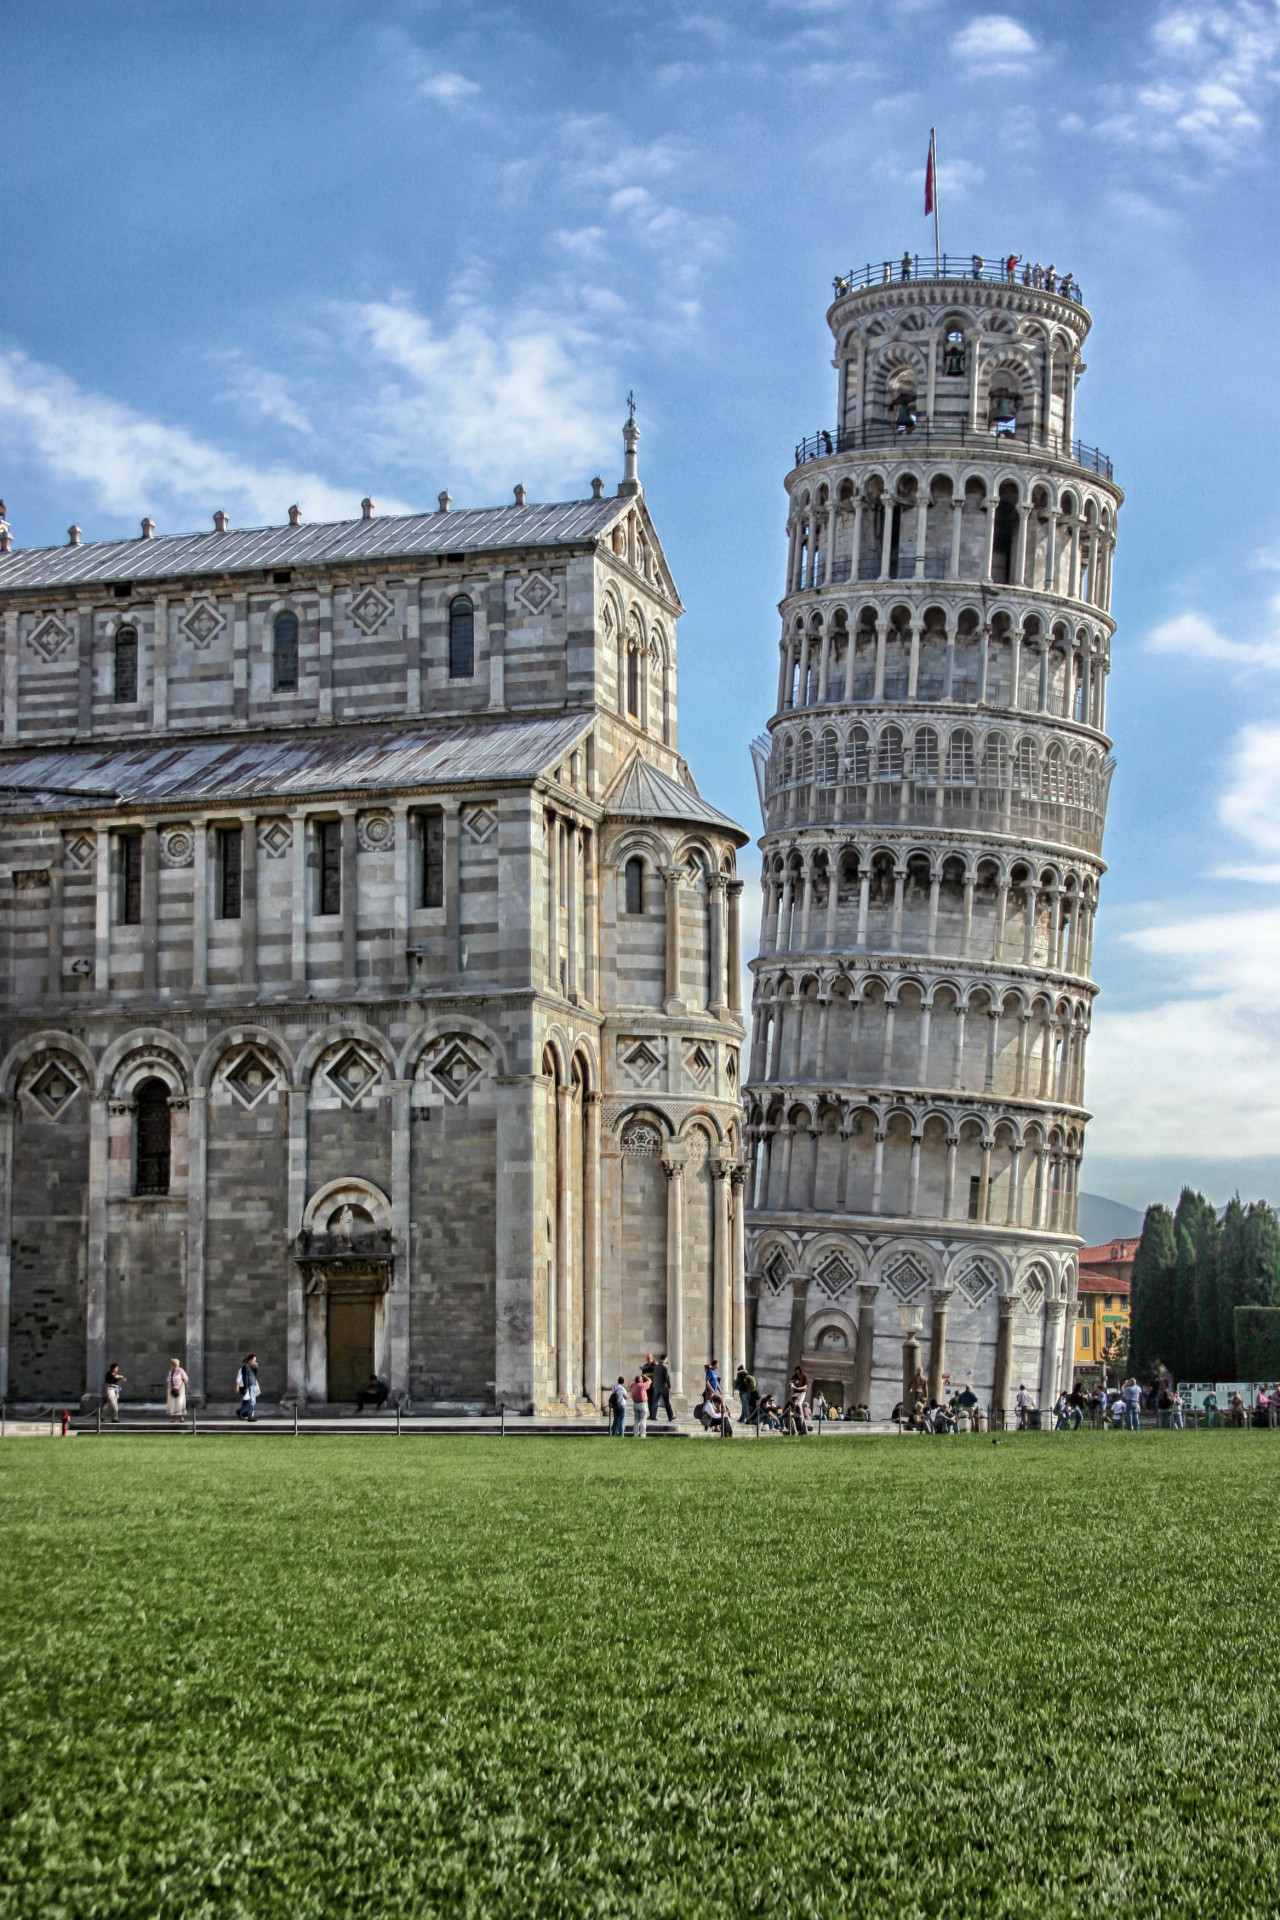 leaning tower of pizza italy